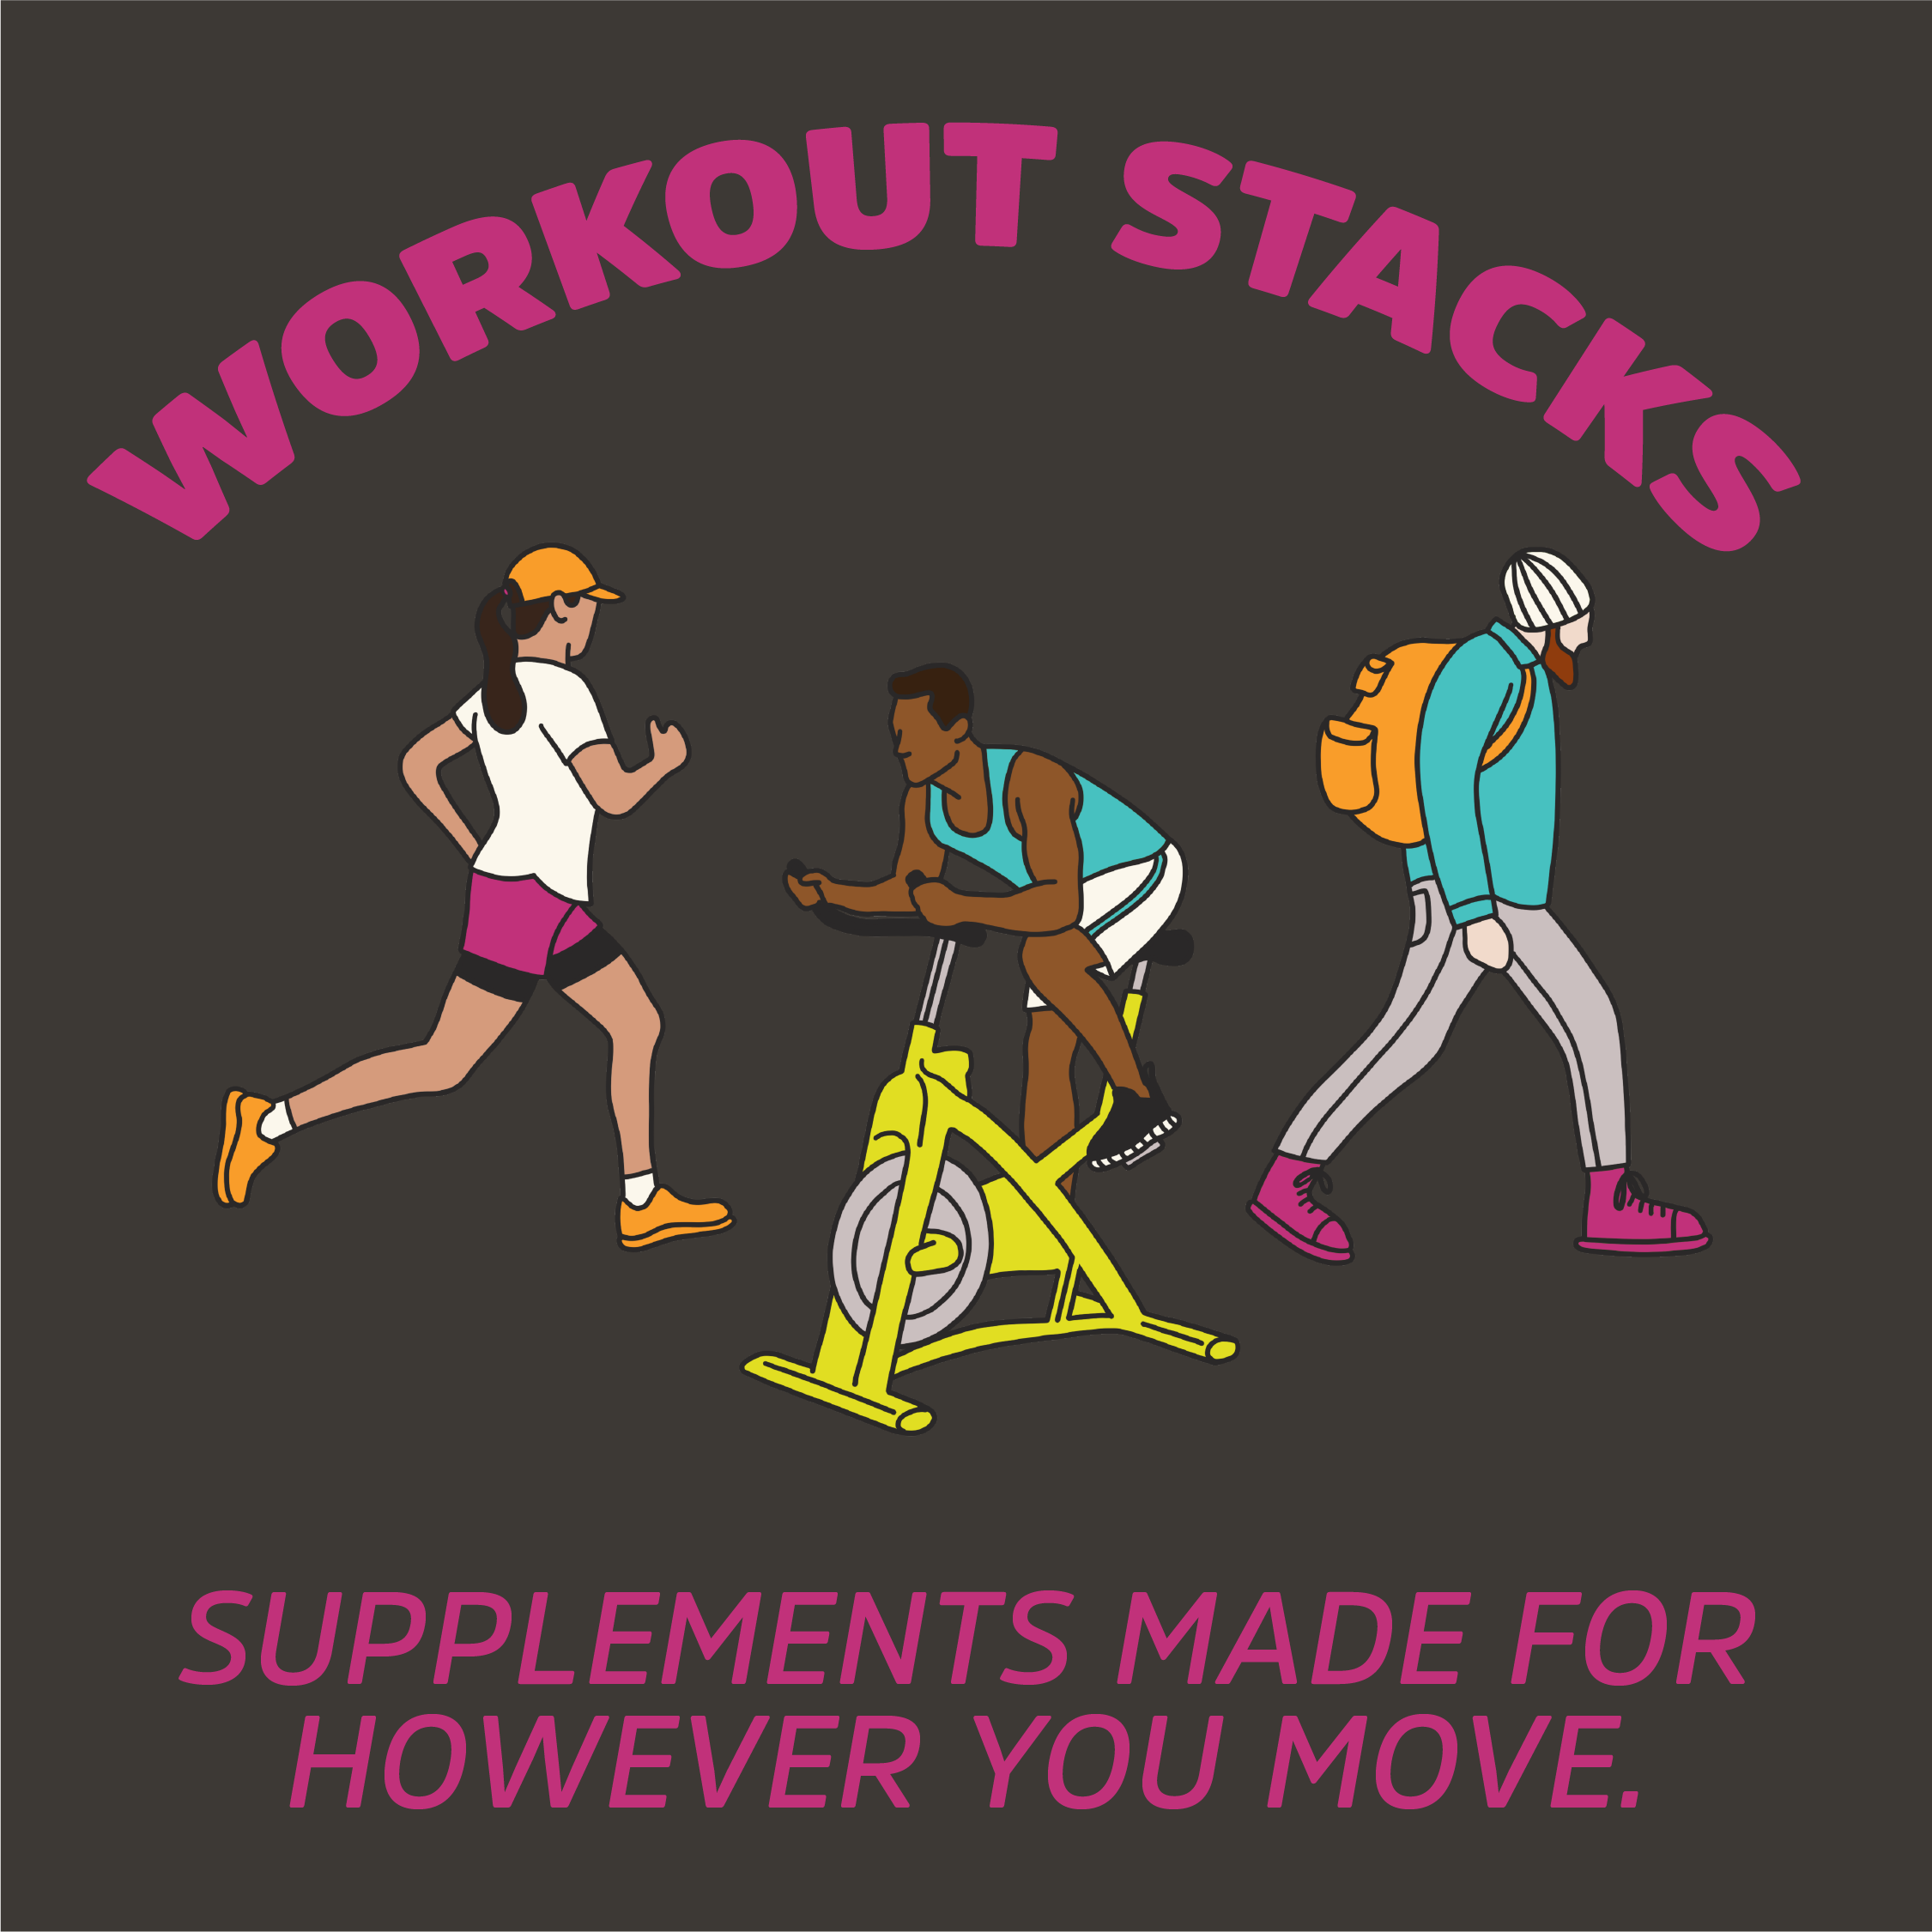 Workout Stacks: Supplements made for however you move